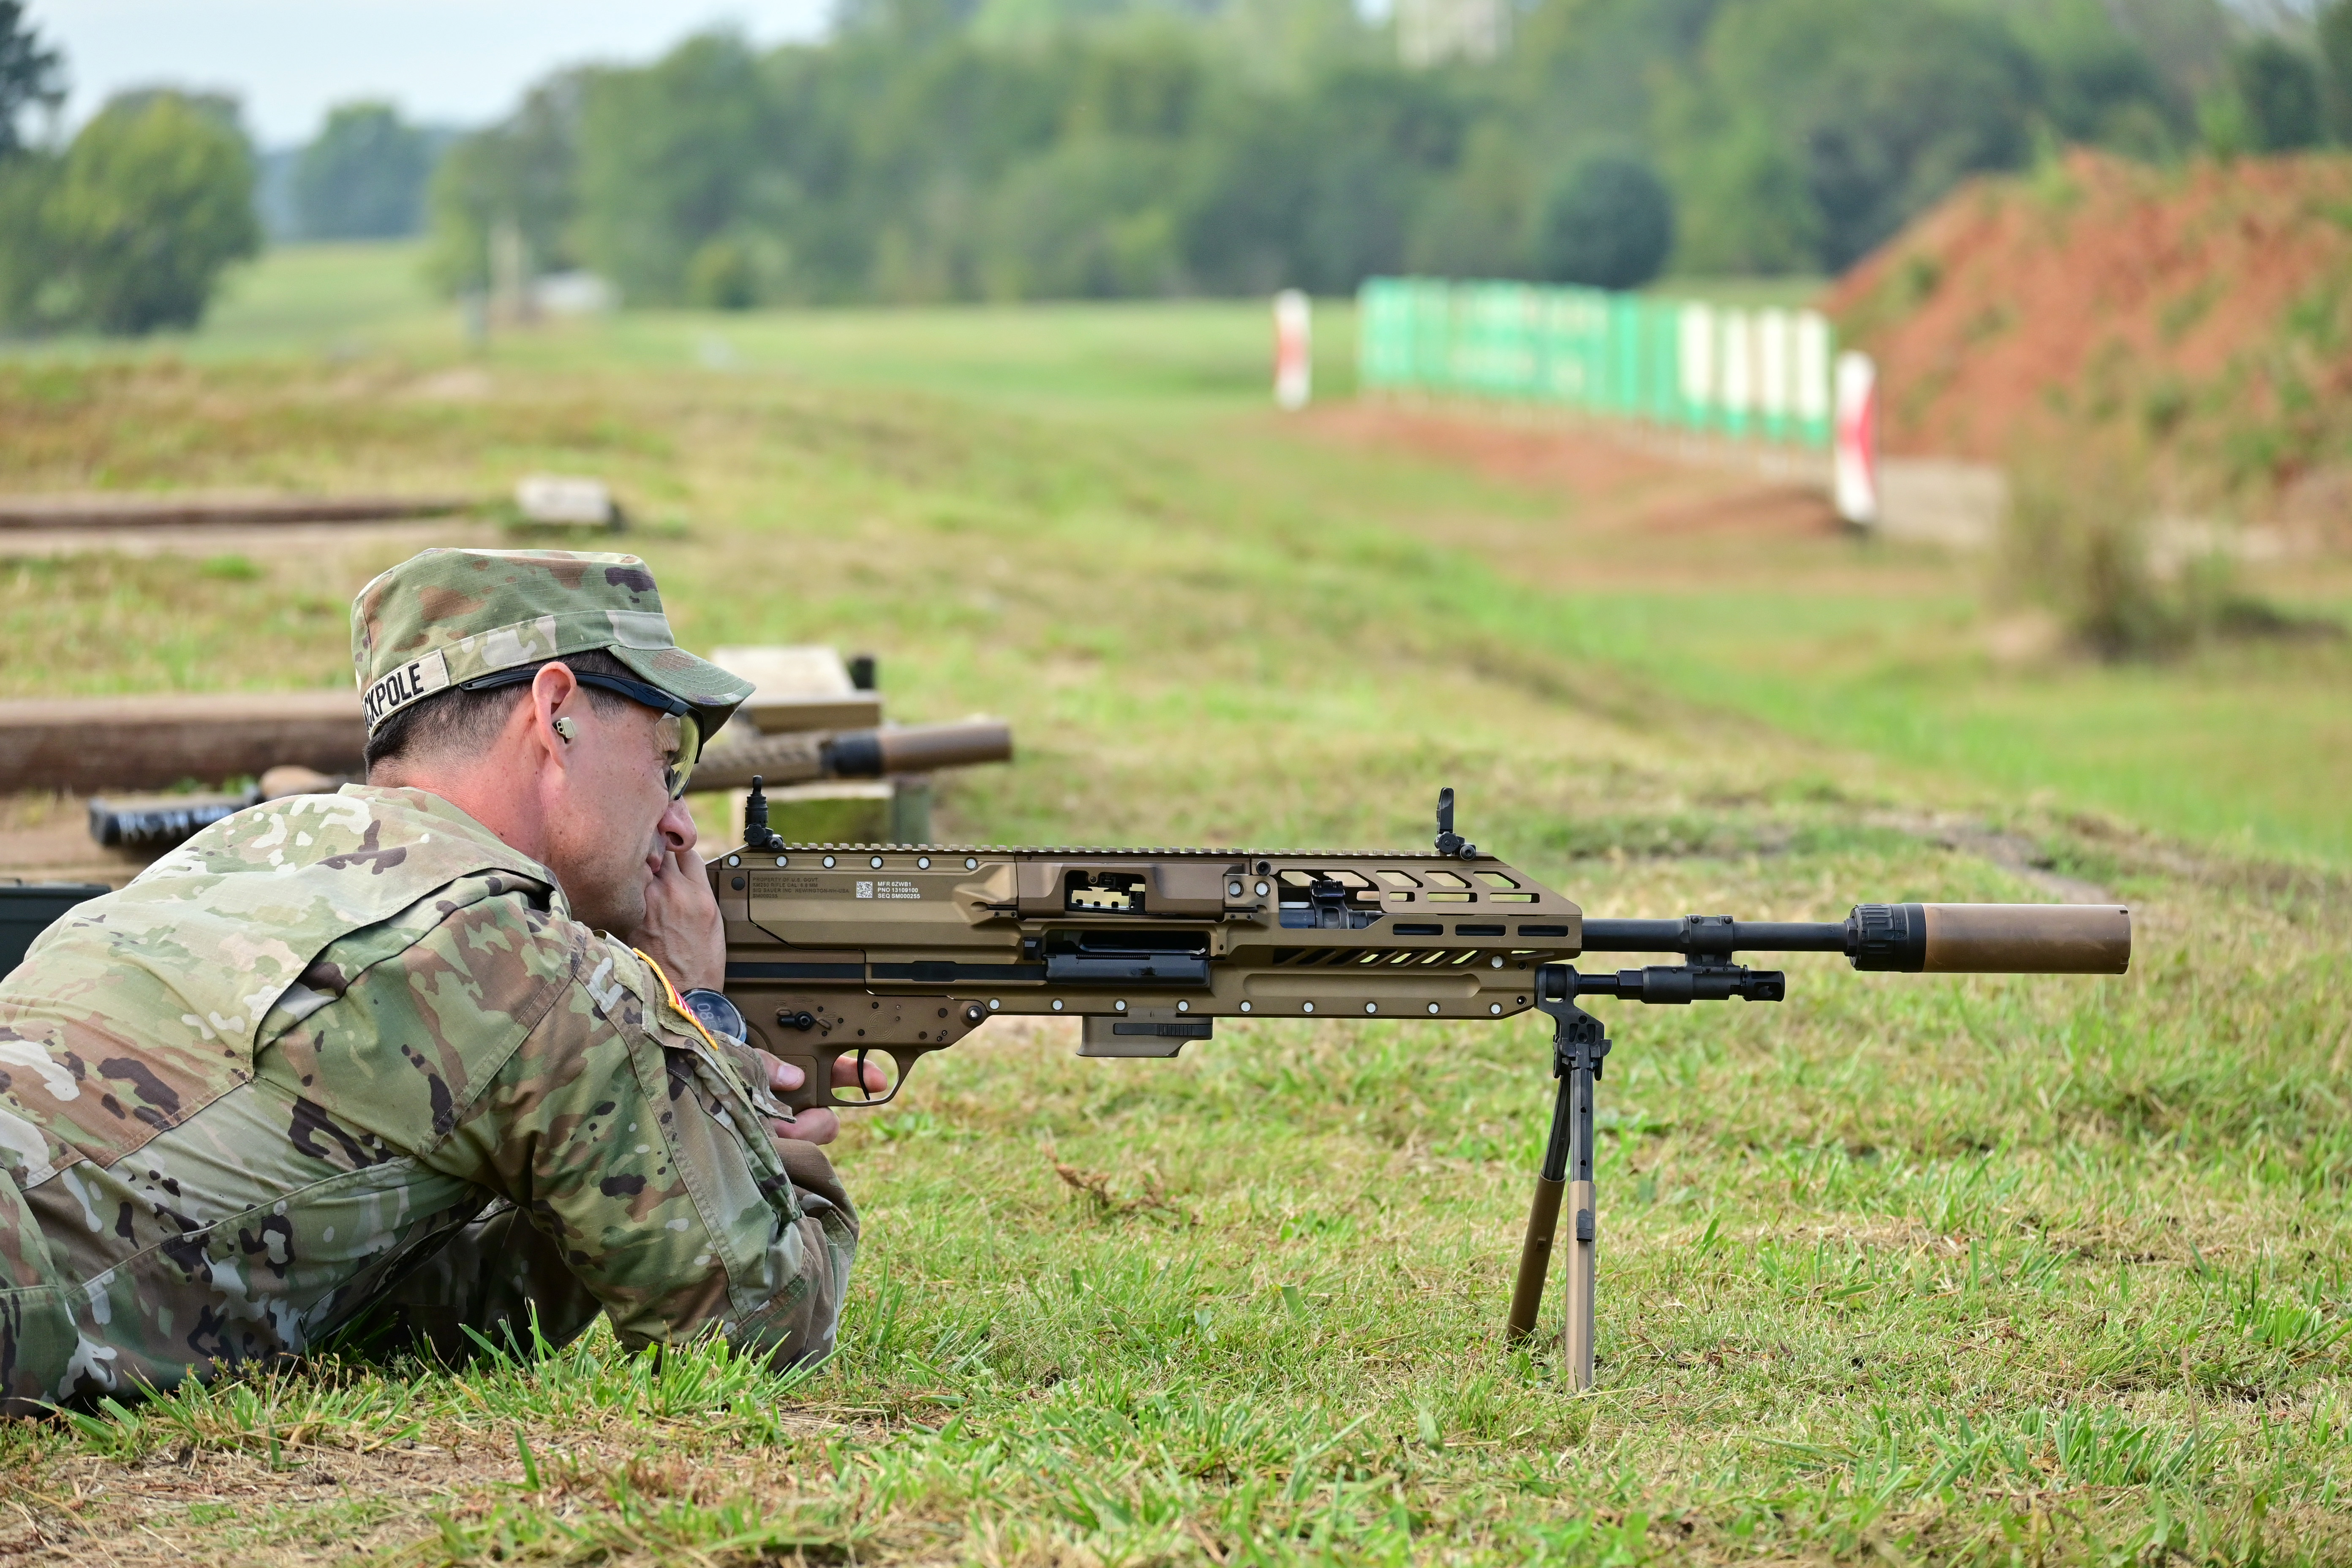 Army Fields Next Generation Squad Weapons to Replace M4 and M249